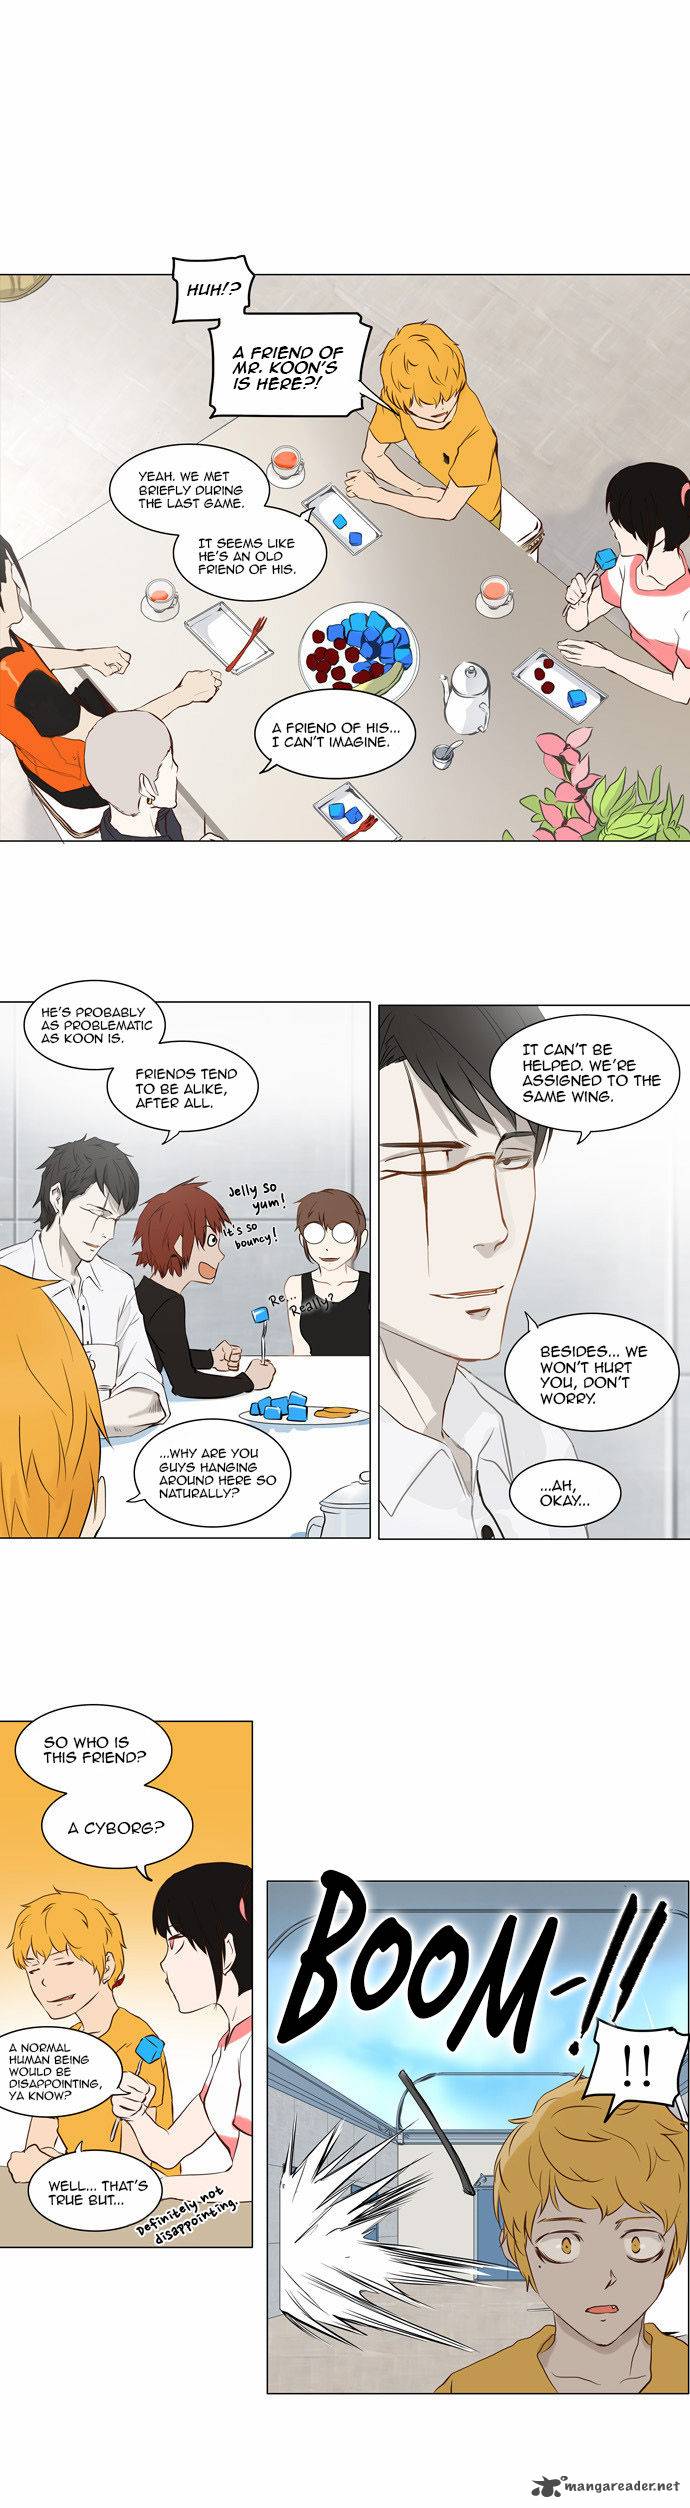 Tower Of God 147 6